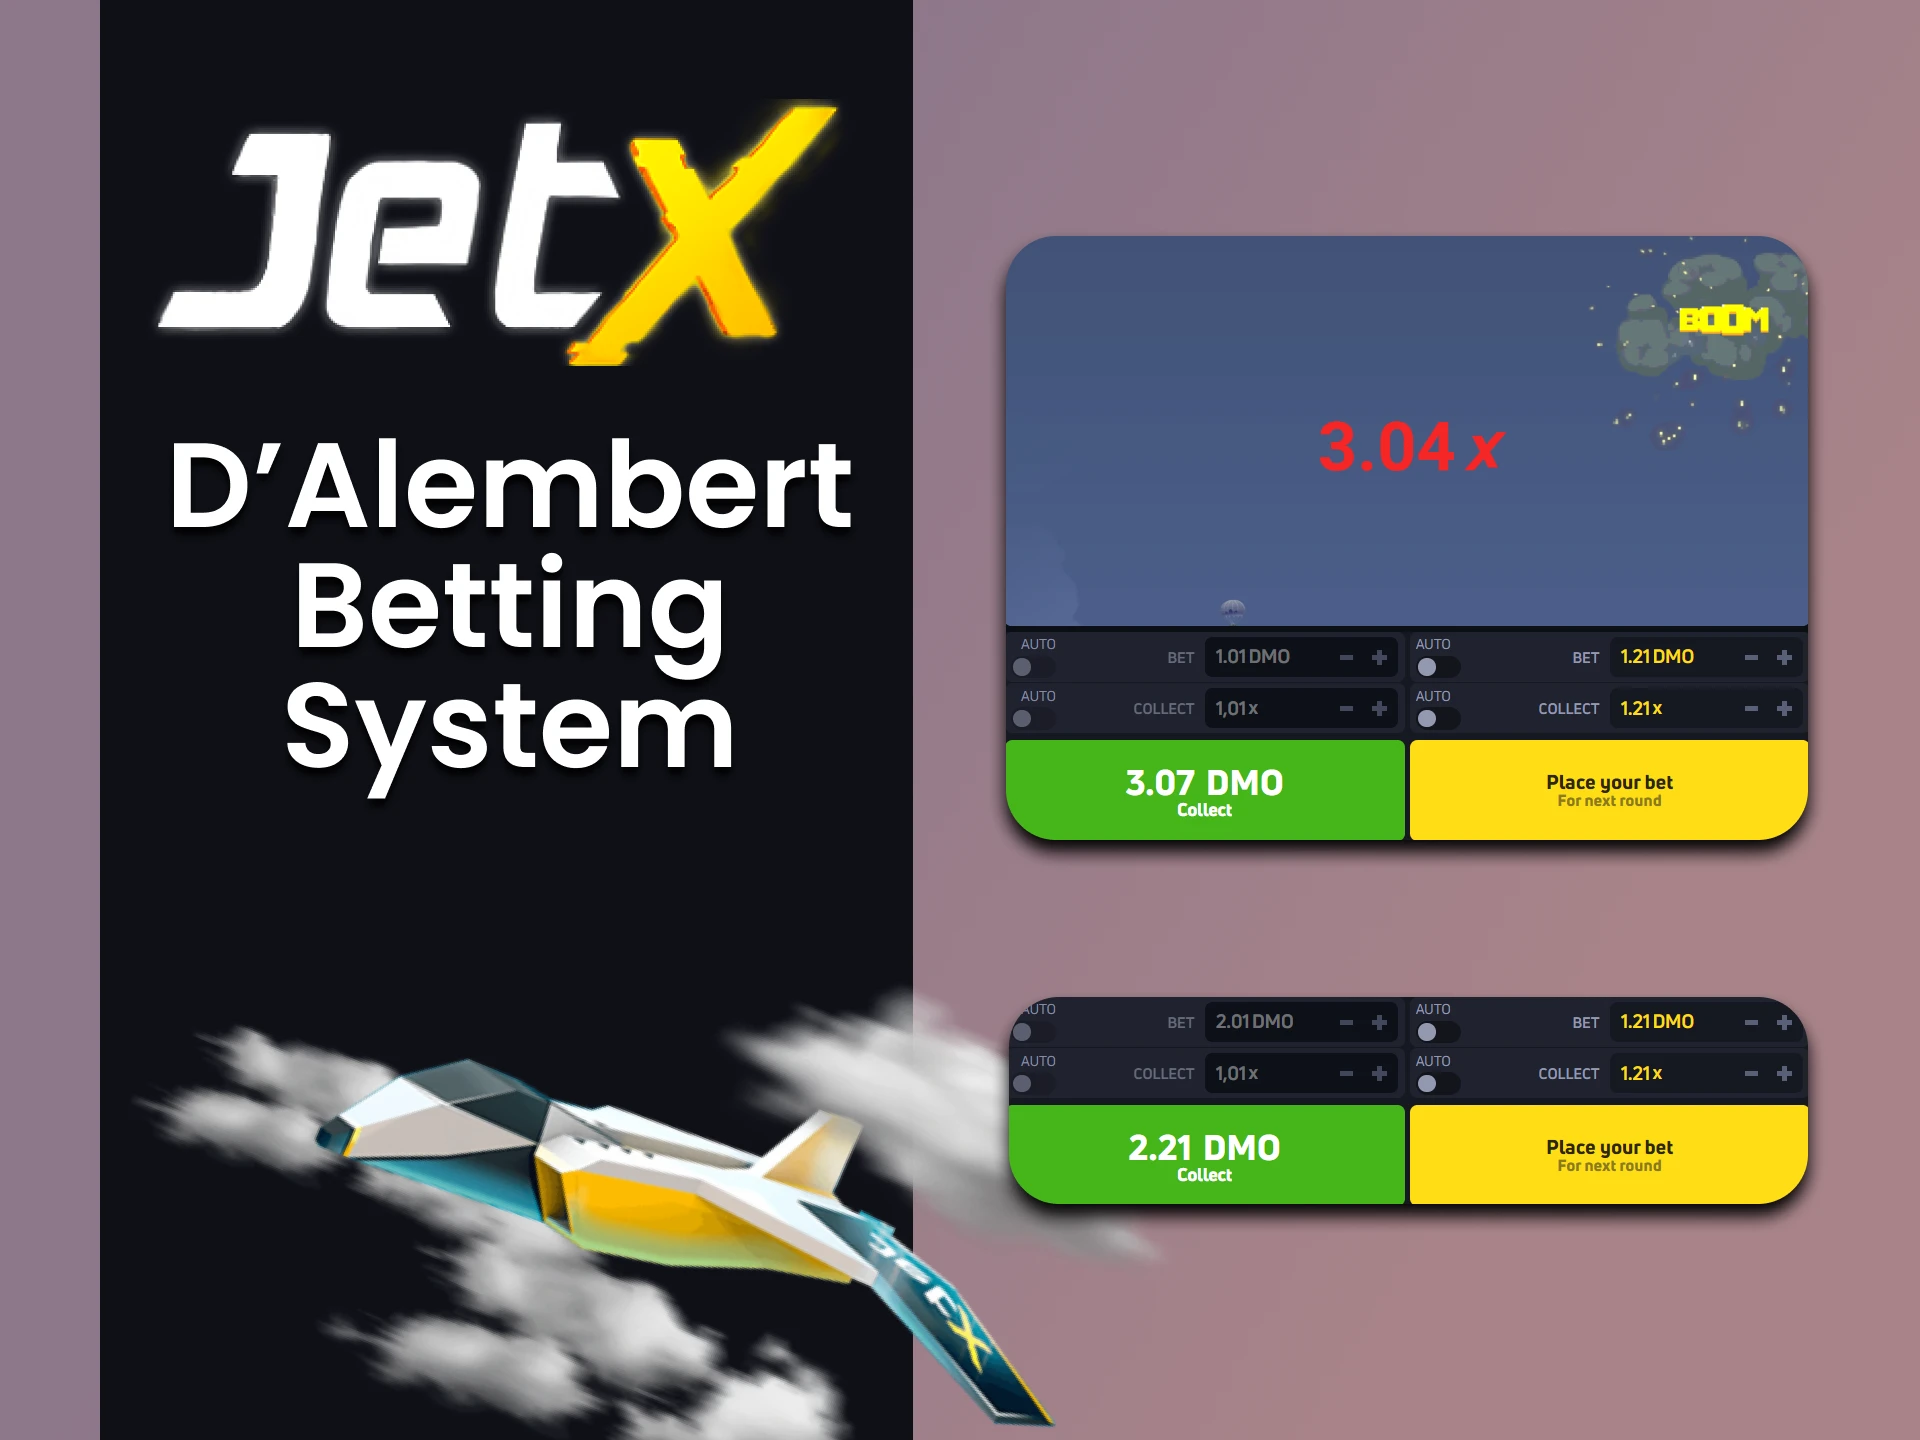 We will tell you about such a betting system for JetX as D.Alembert.